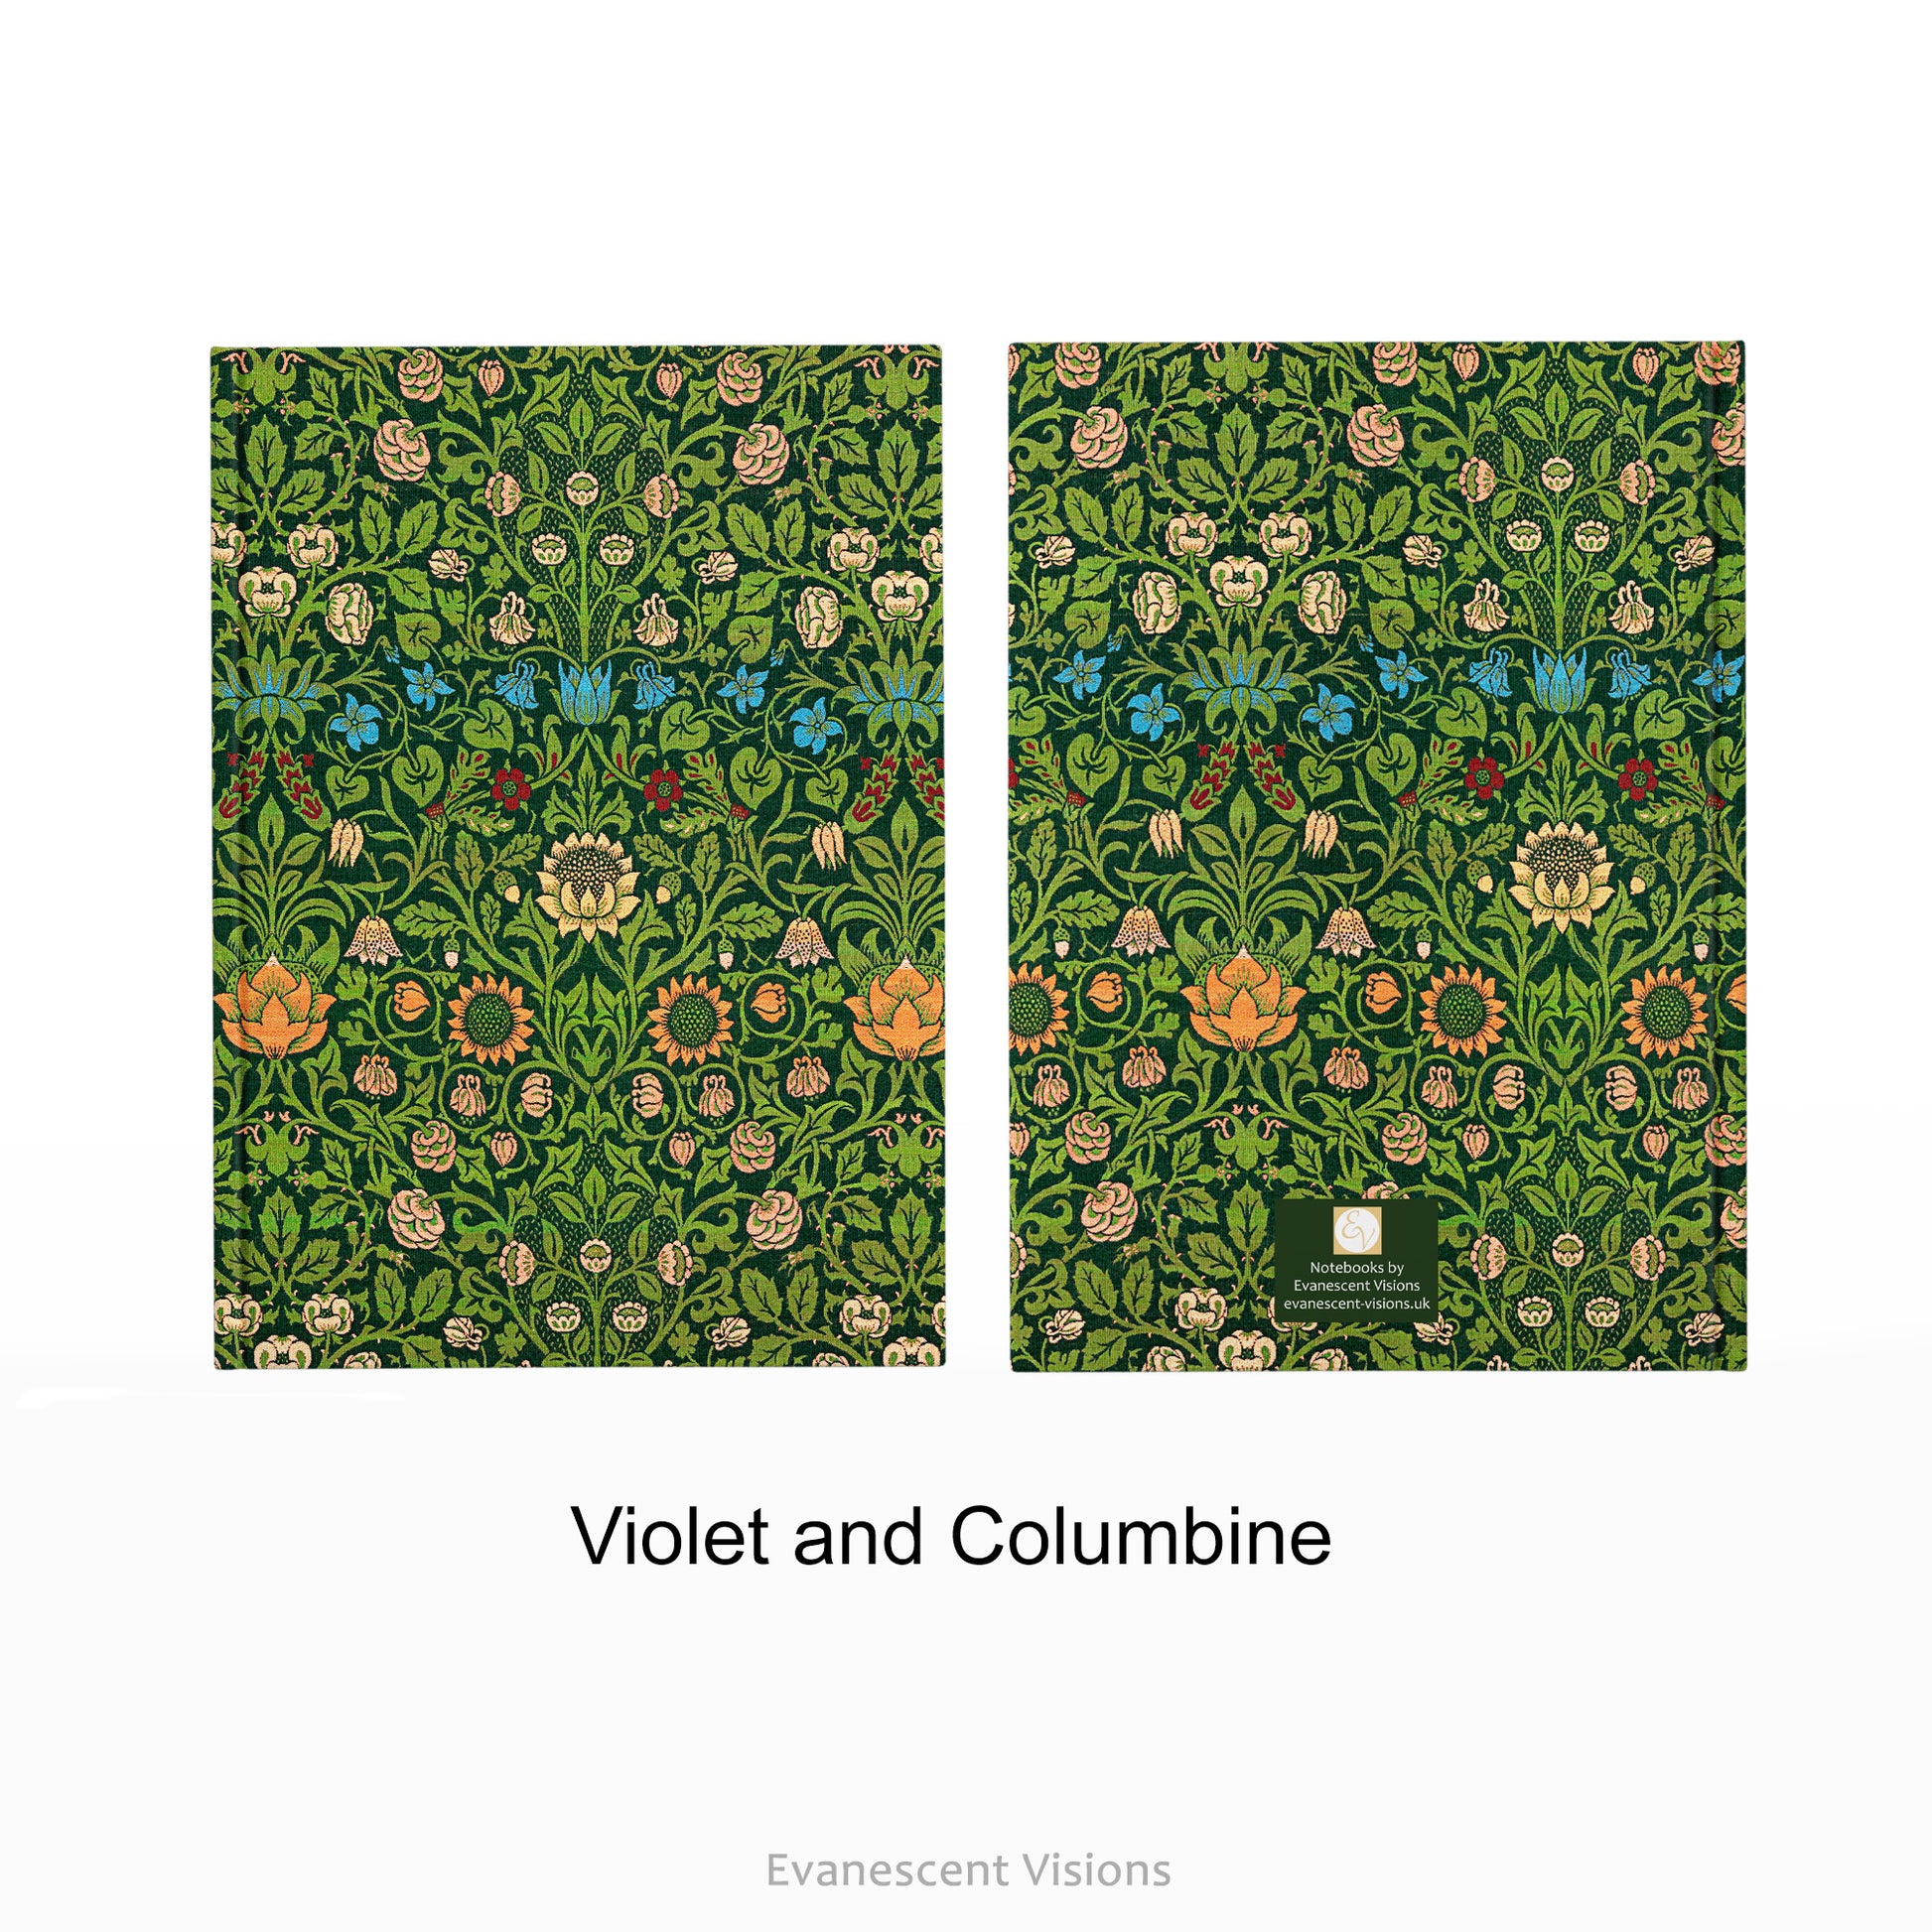 William Morris Patterned Hardcover Notebook with Violet and Columbine design